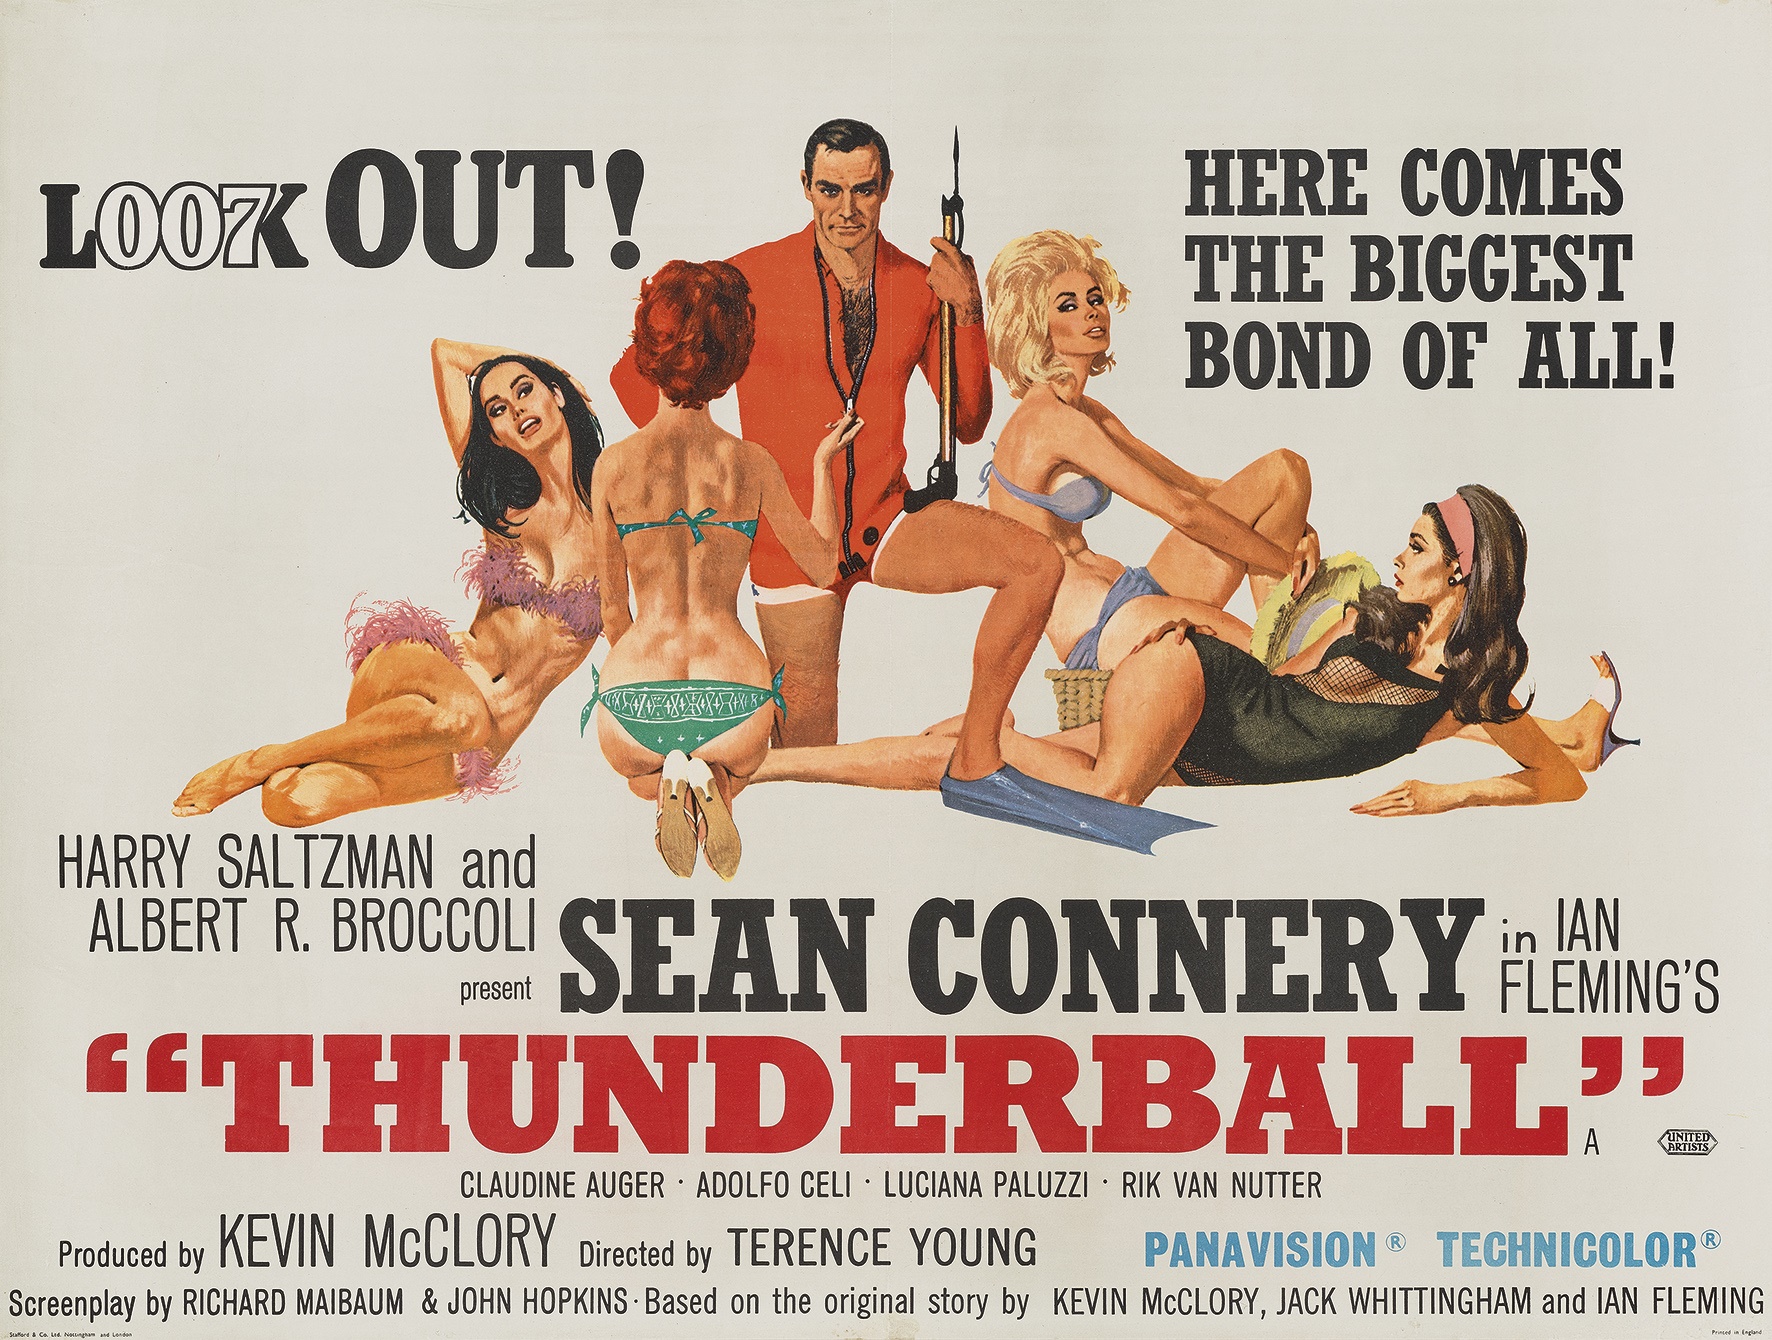 ROBERT MCGINNIS (B.1926) | THUNDERBALL offset lithographic poster, 1965, British Quad, United Artists 30 x 40 in. (76 x 102 cm) | £6,000 - 8,000 + fees